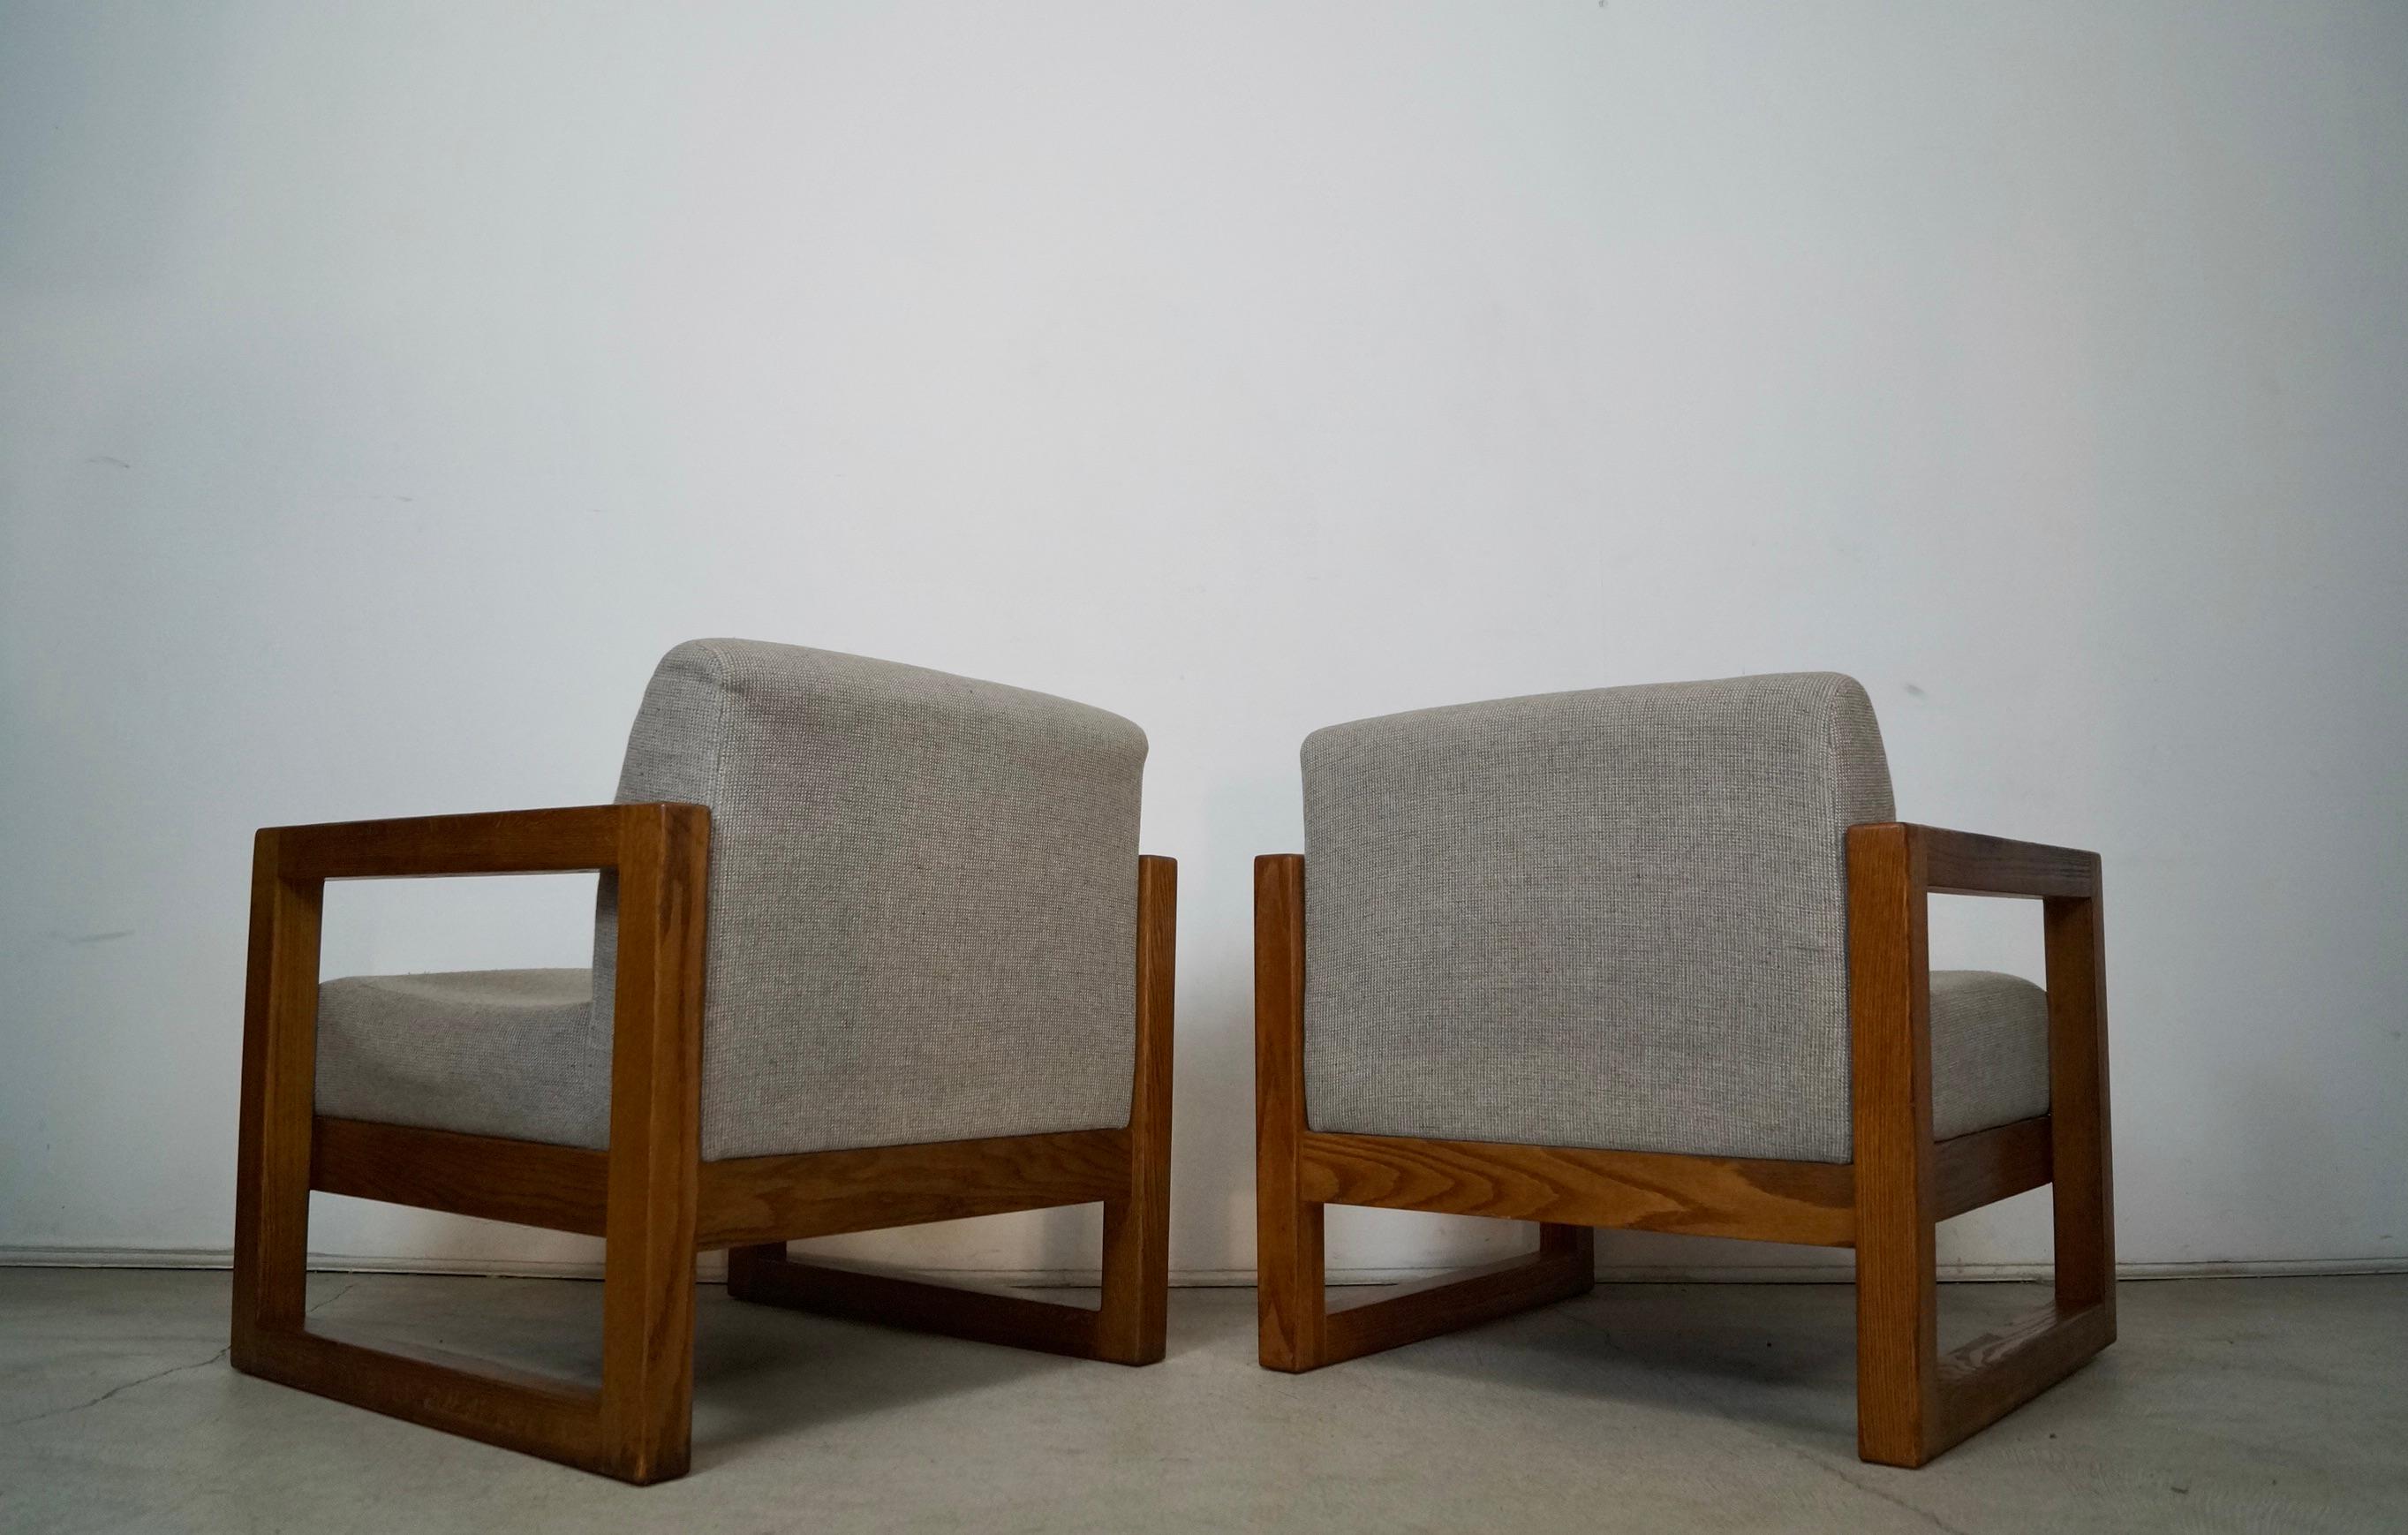 Late 20th Century Vintage Postmodern Solid Oak Cube Lounge Chairs - a Pair